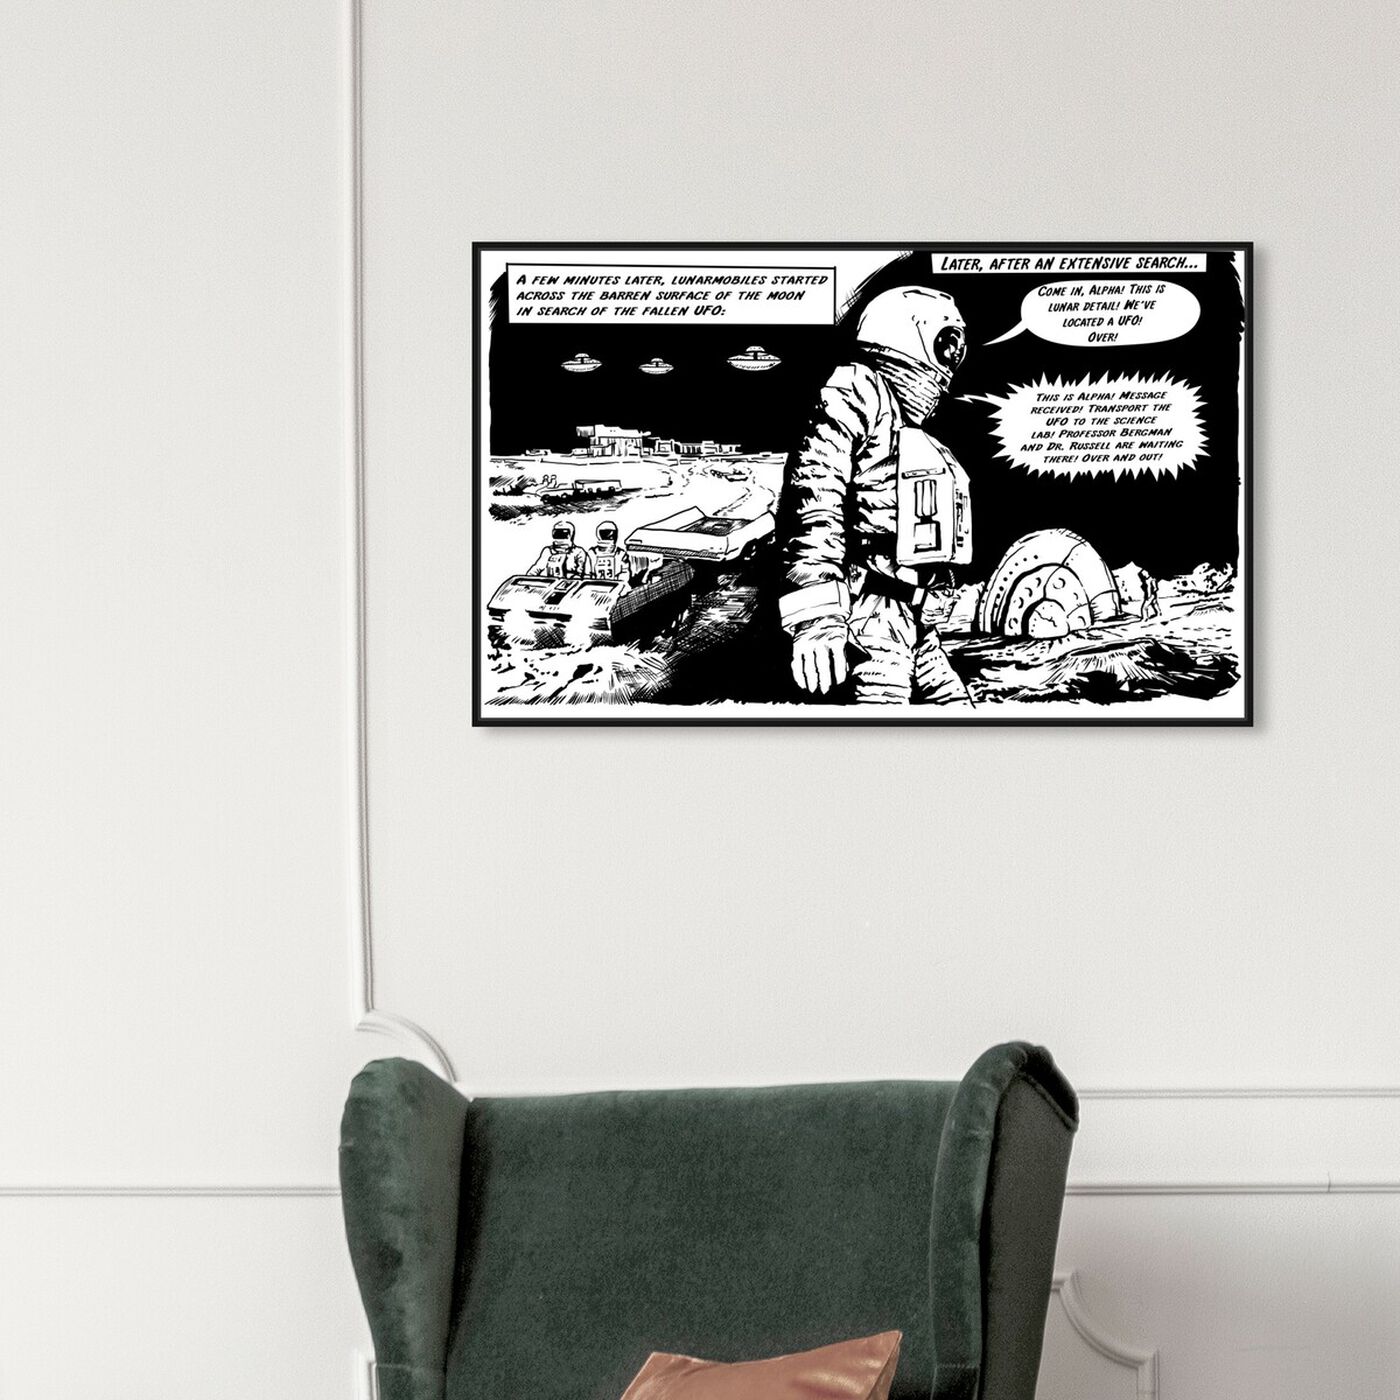 Hanging view of On The Moon featuring advertising and comics art.